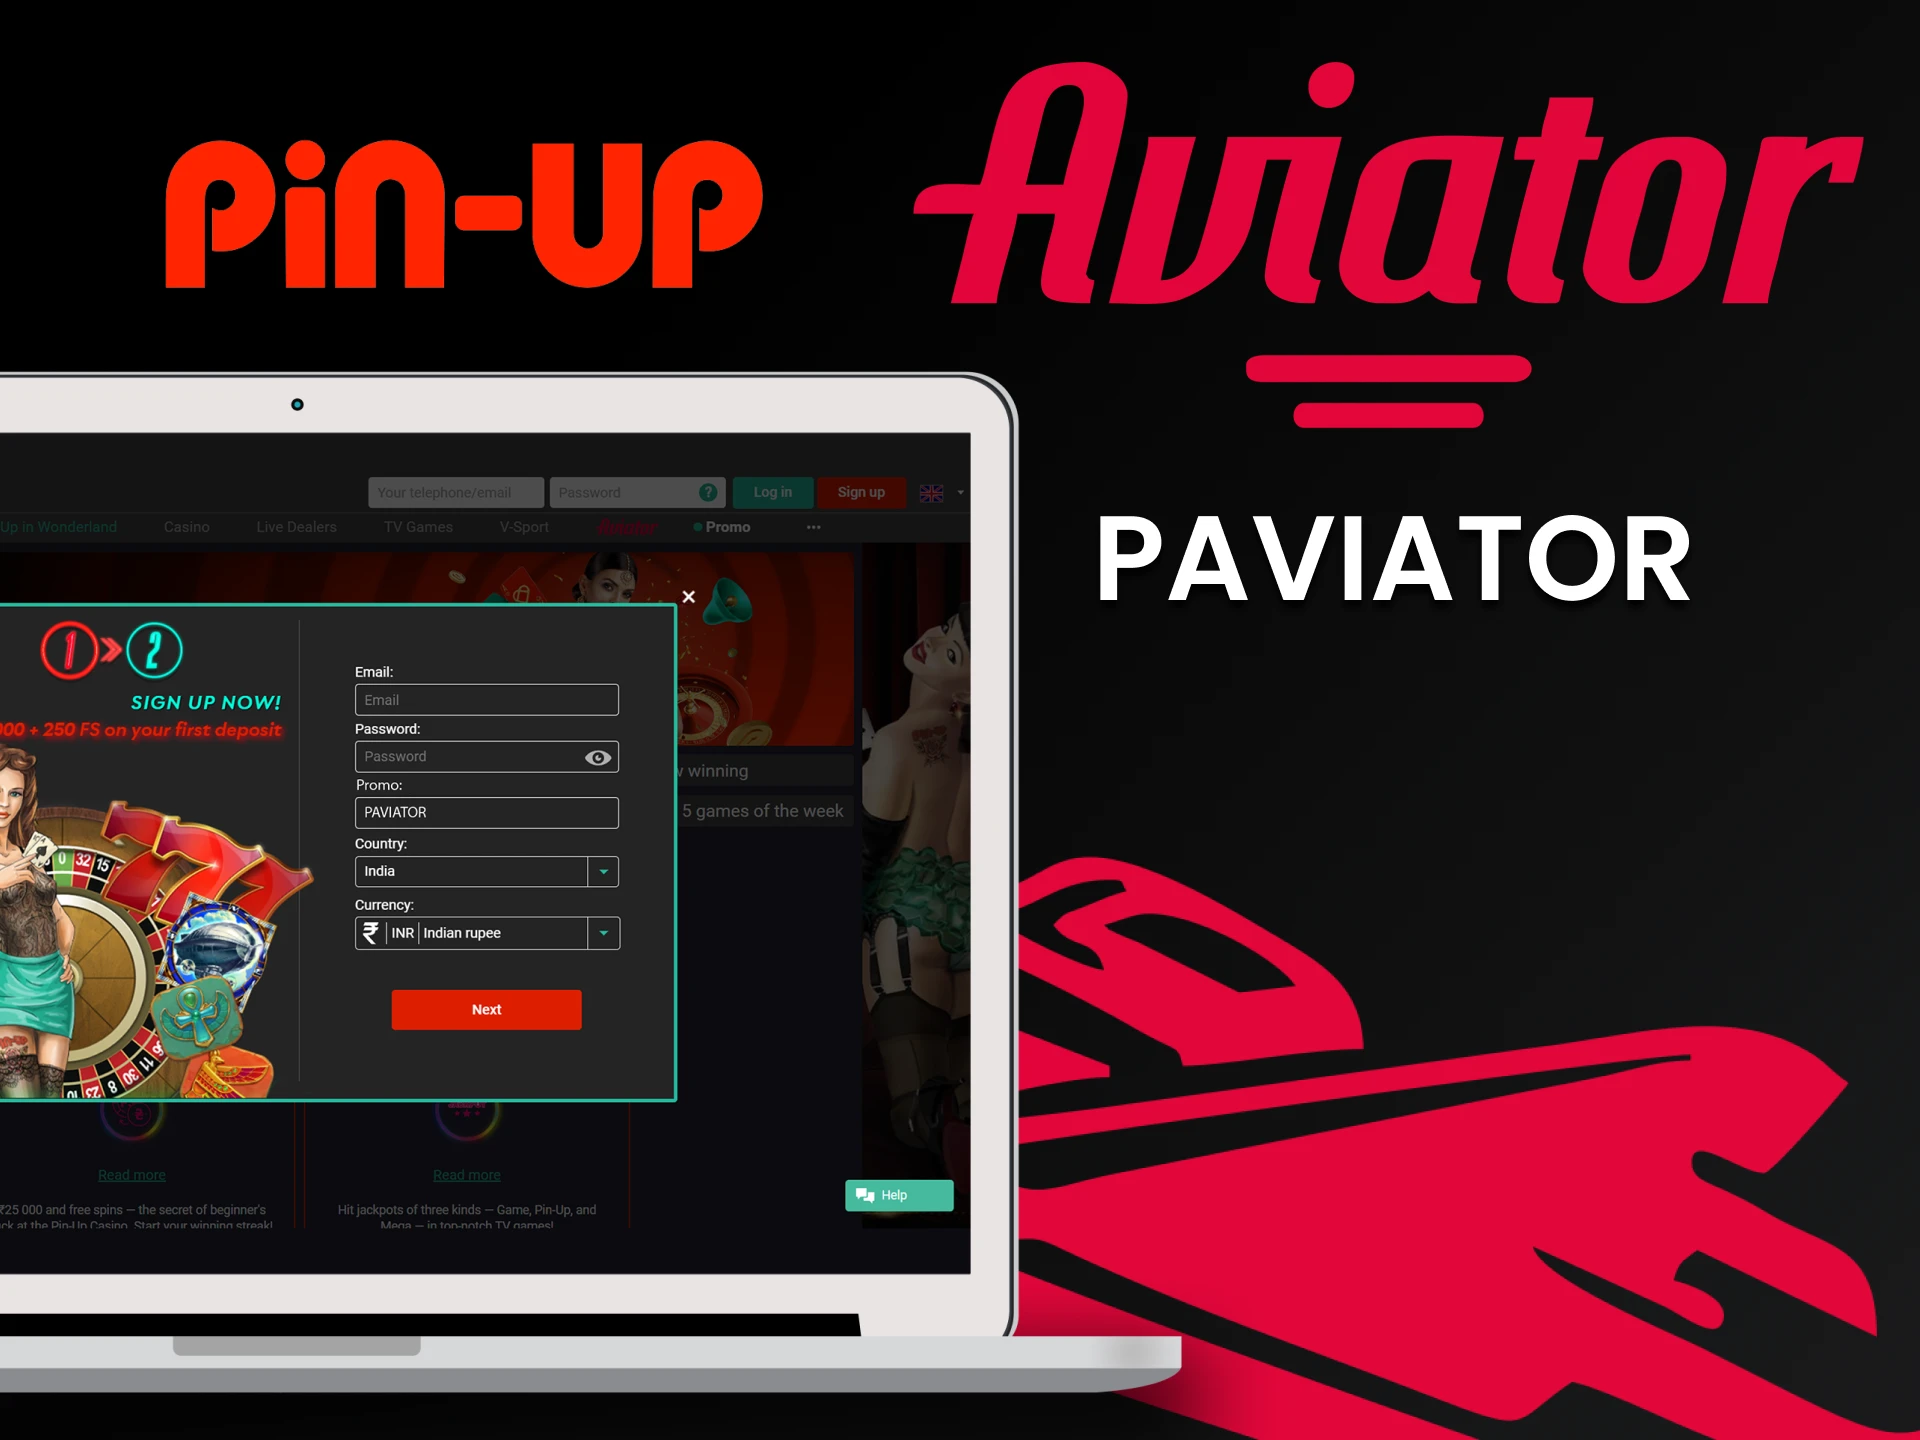 Use the promo code from Pin Up to play Aviator.